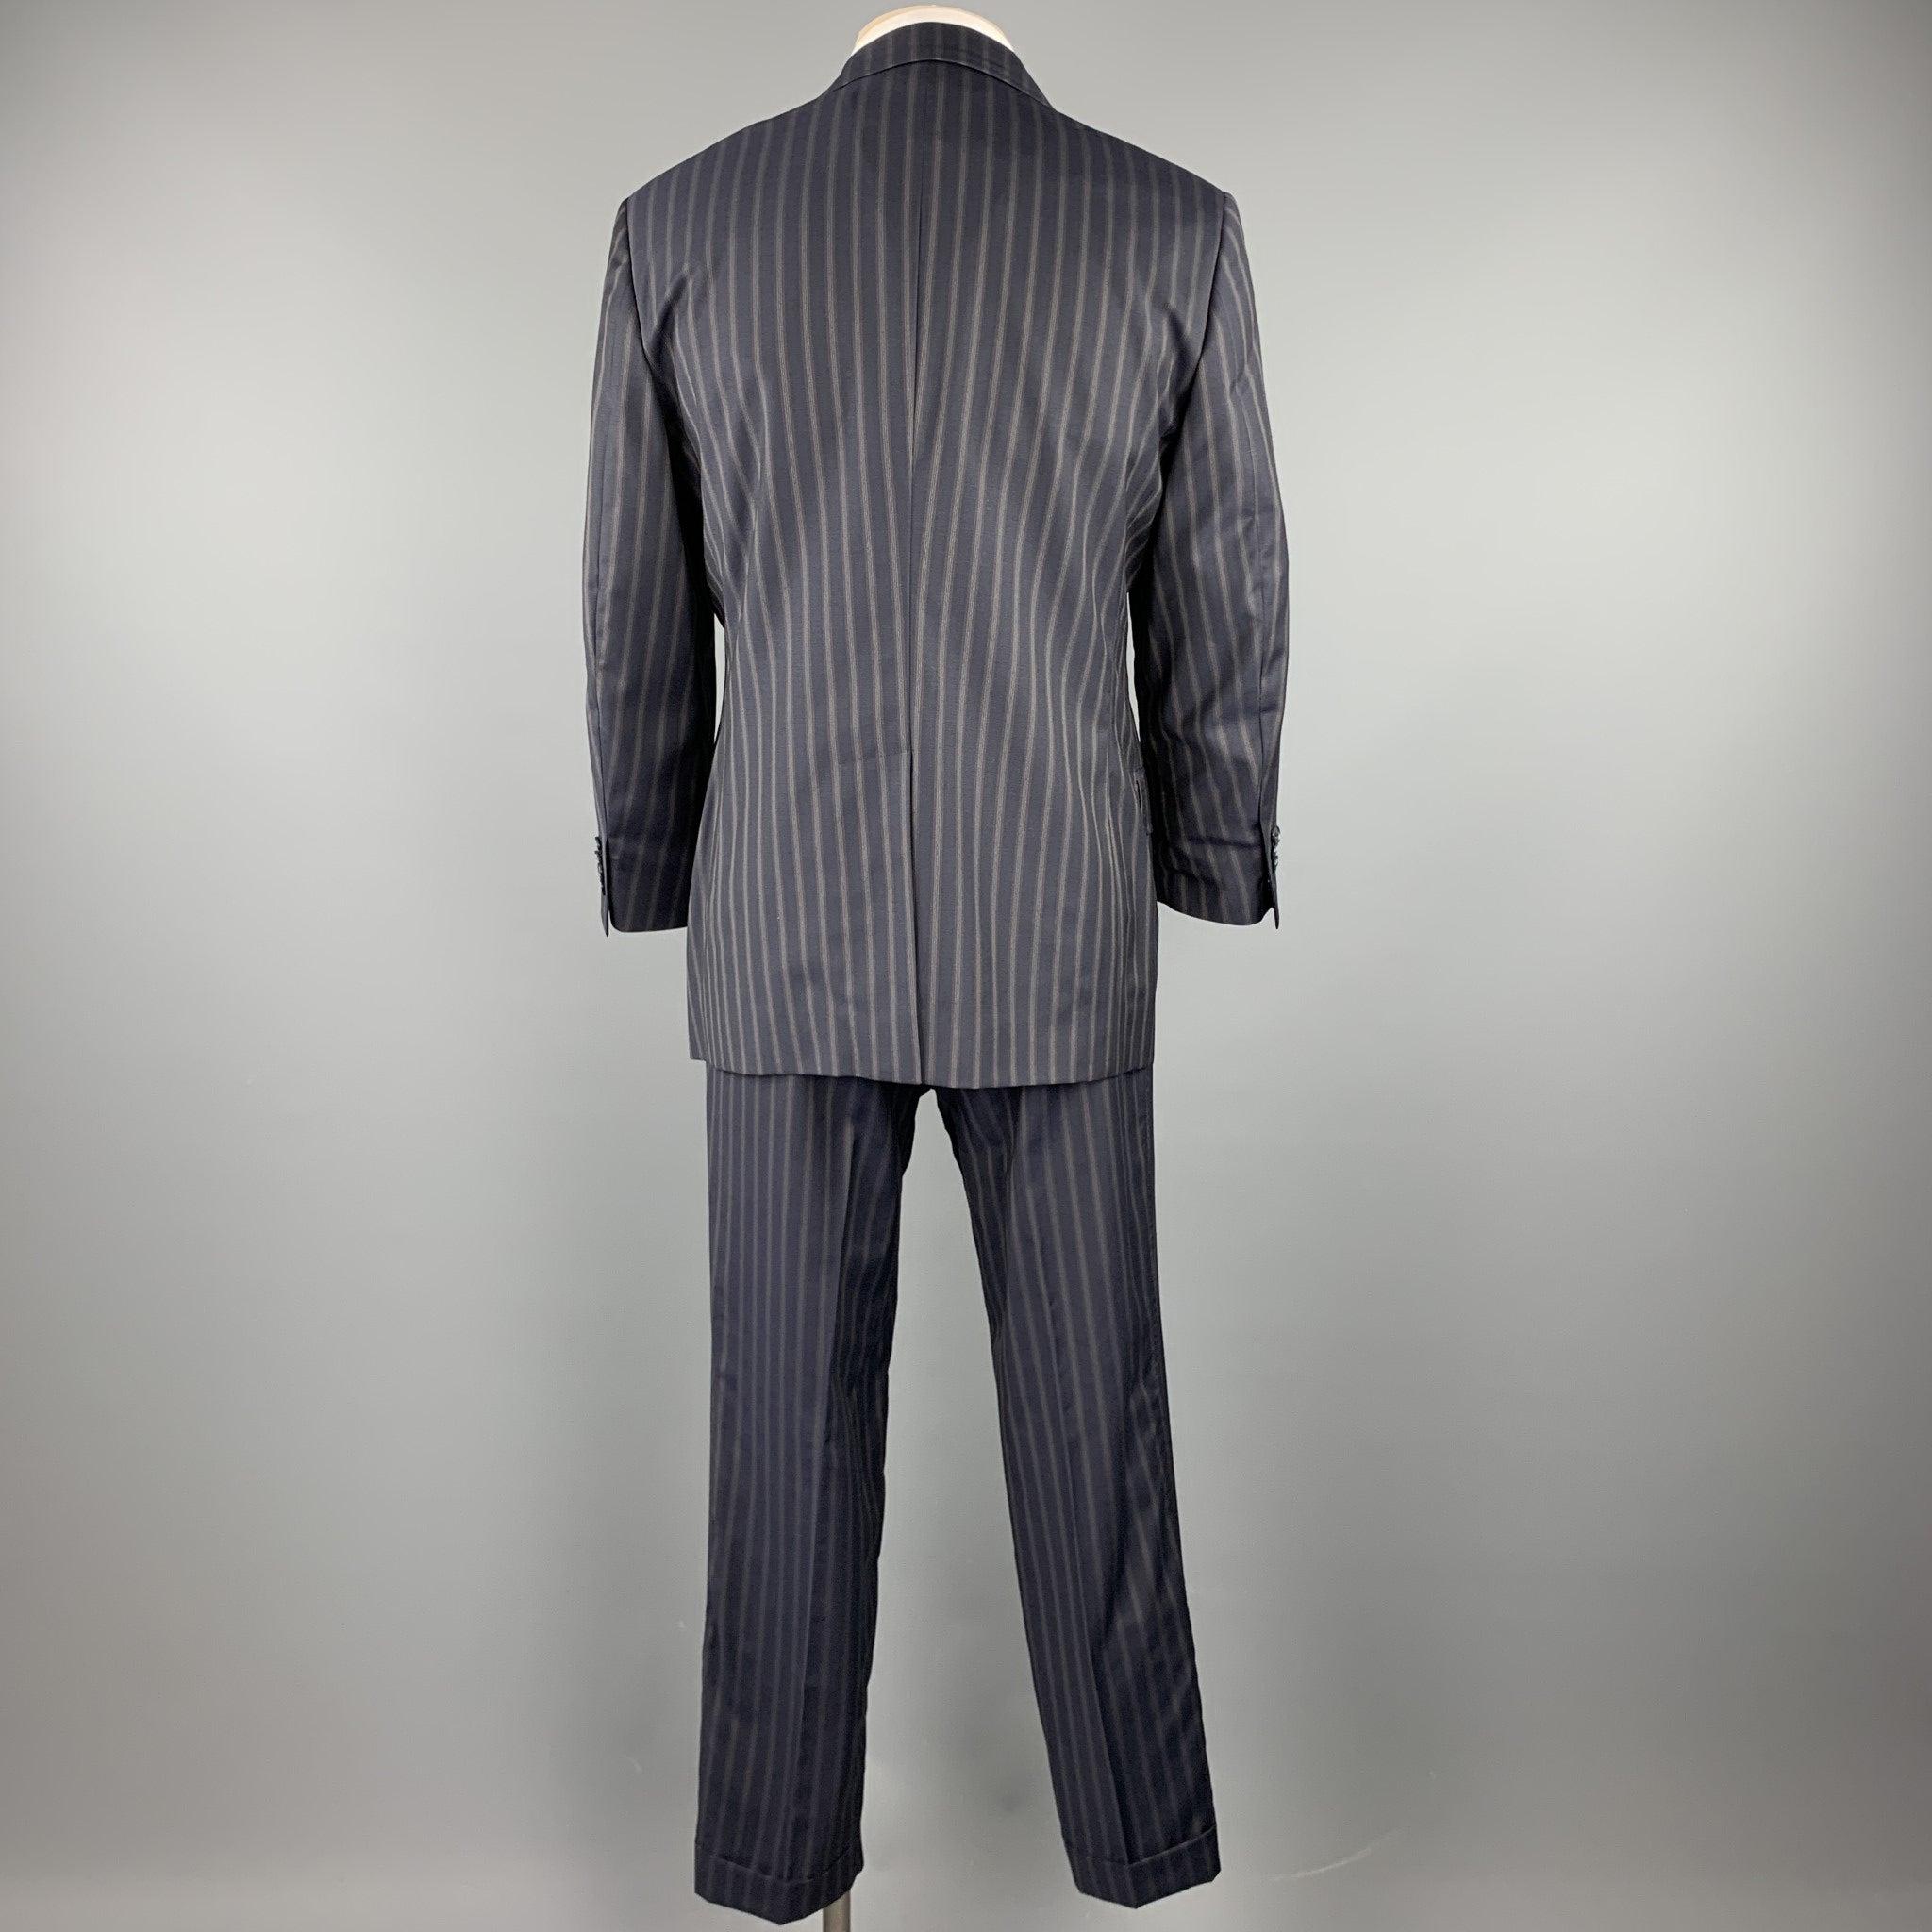 DOLCE & GABBANA 40 Regular Navy Stripe Wool Notch Lapel Suit In Excellent Condition For Sale In San Francisco, CA